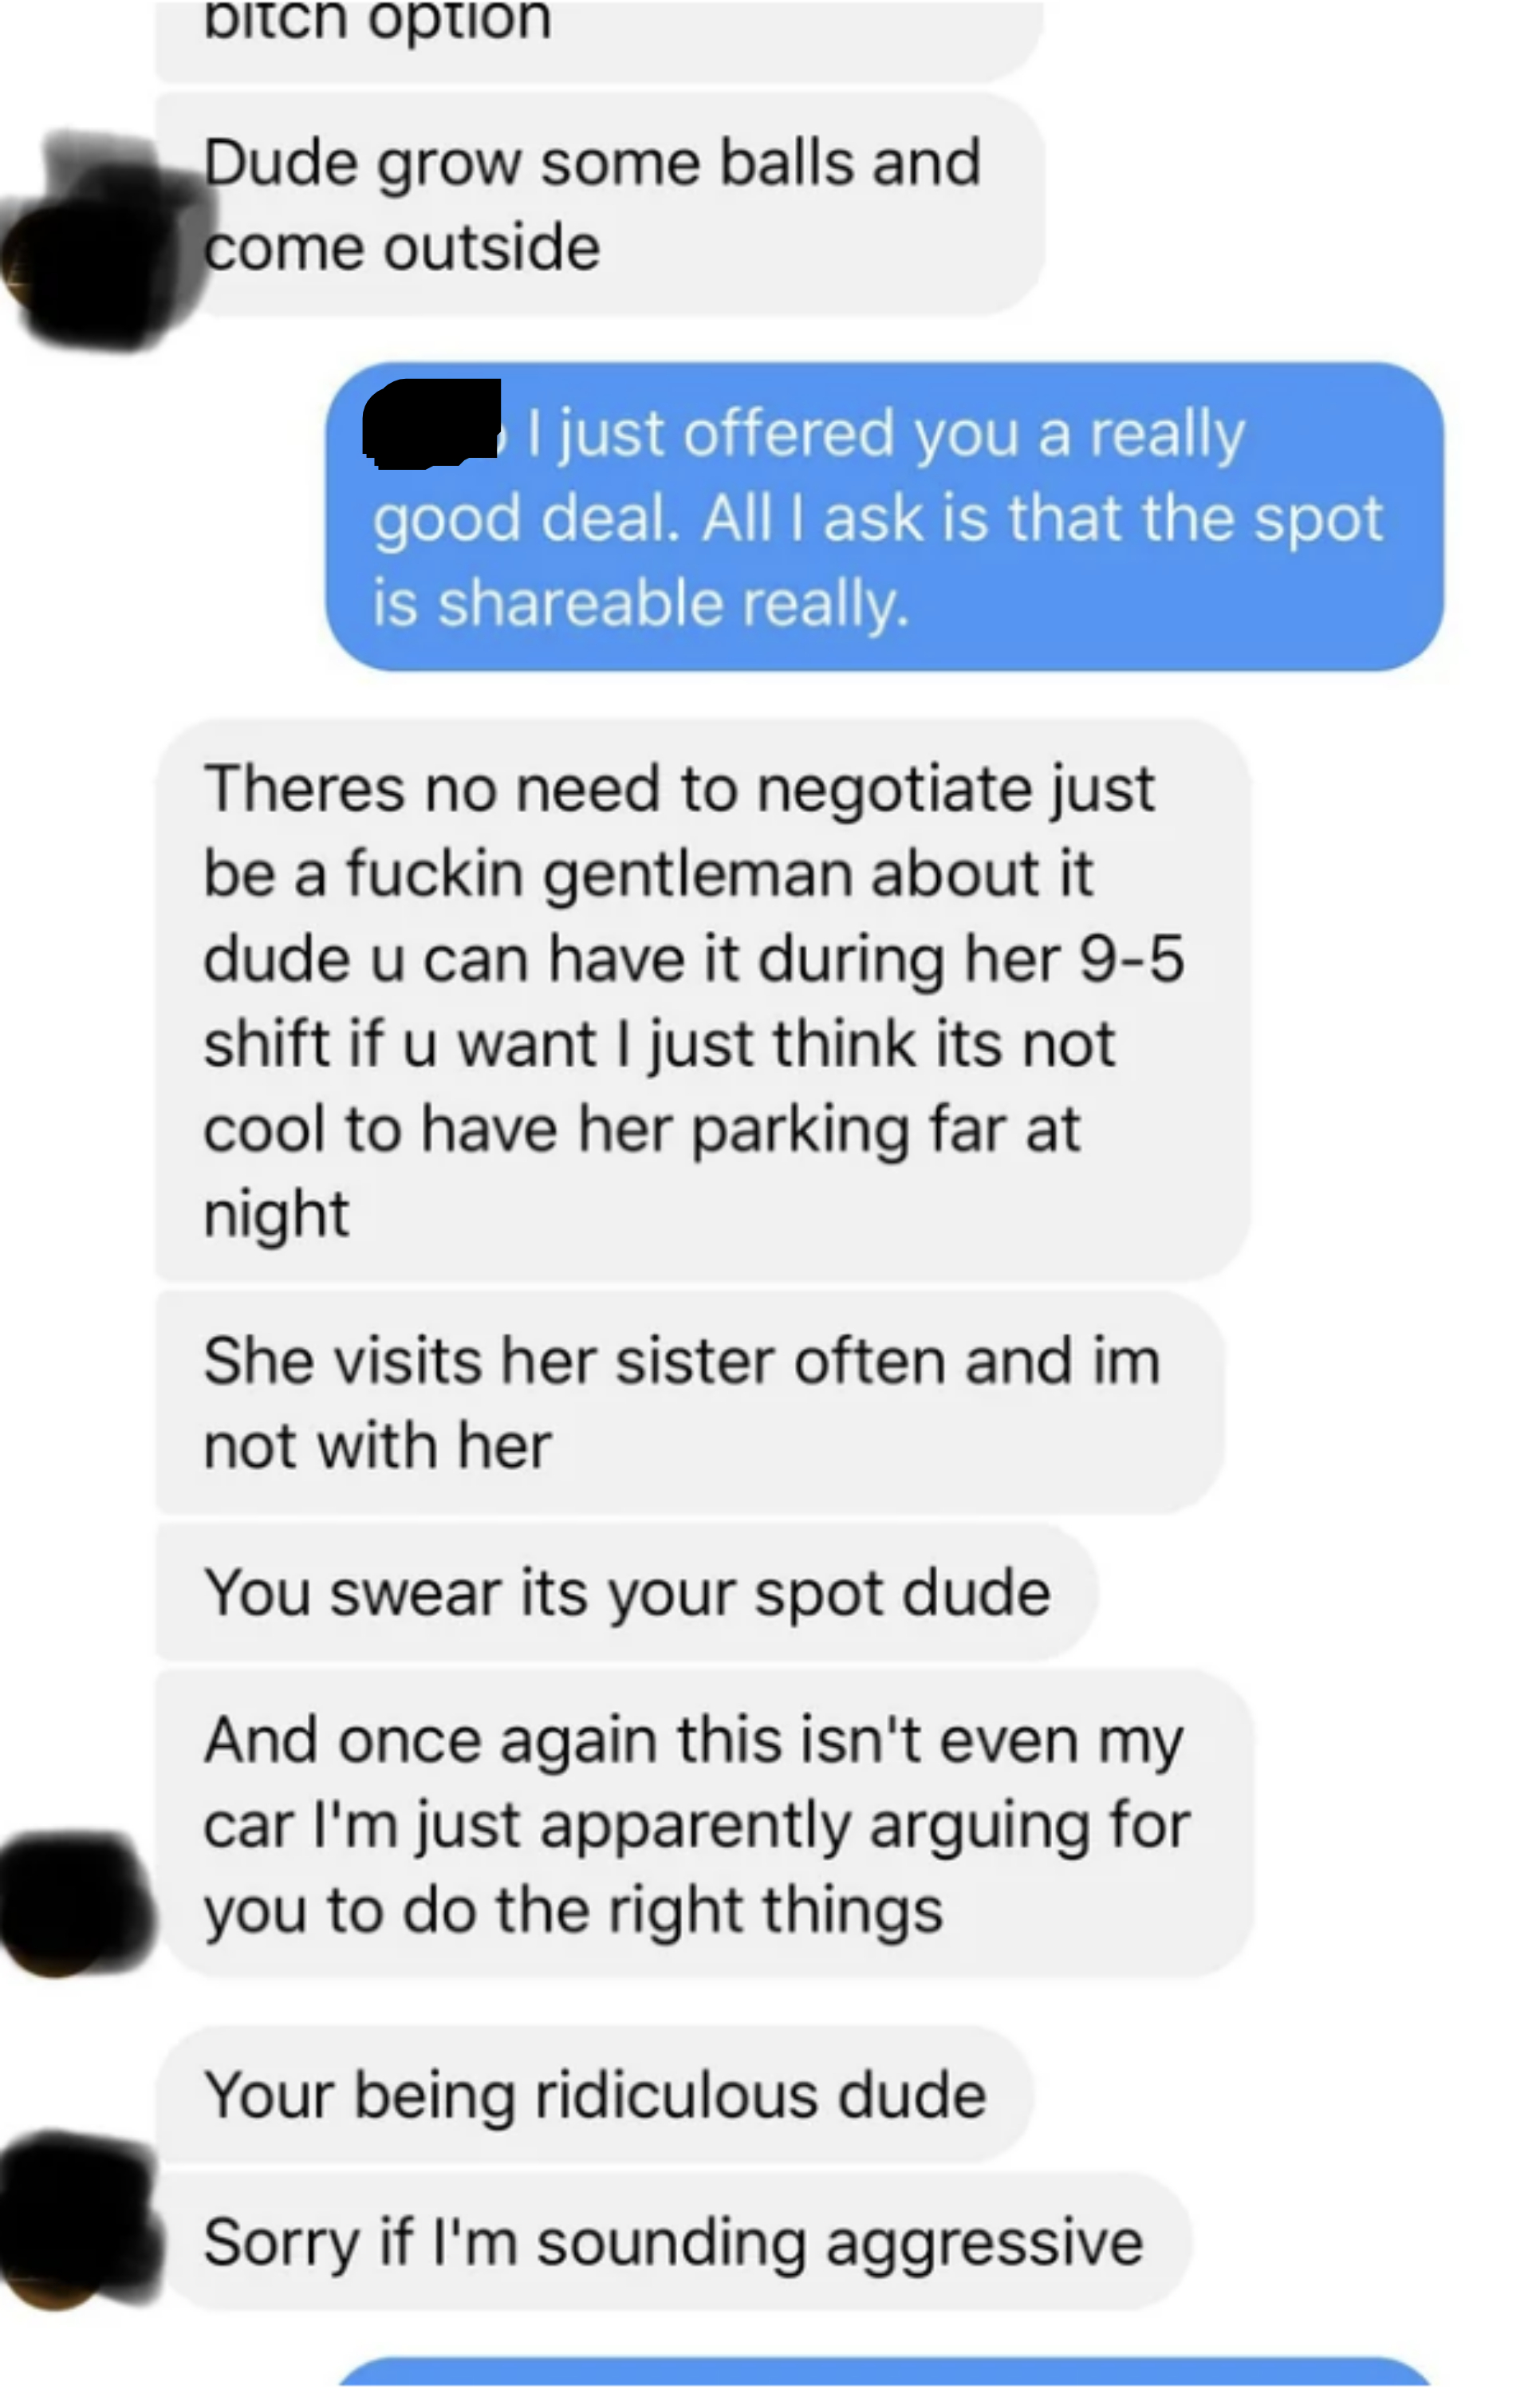 A person asks that their parking spot remain shared, and the roommate says it&#x27;s a security concern for his girlfriend so she should get the spot